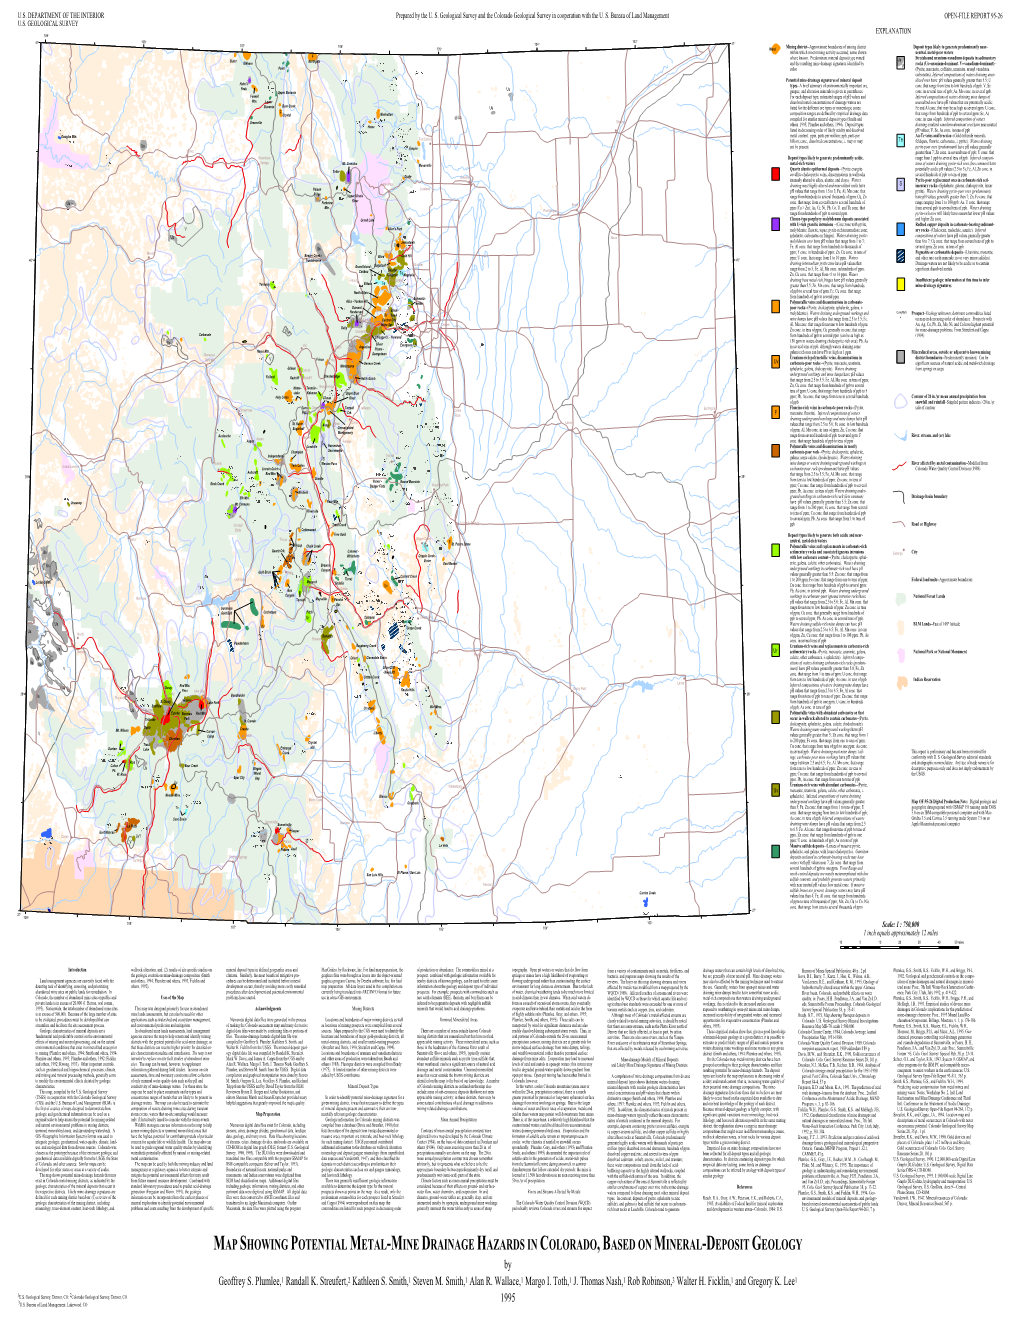 MAP SHOWING POTENTIAL METAL-MINE DRAINAGE HAZARDS in COLORADO, BASED on MINERAL-DEPOSIT GEOLOGY by Geoffrey S